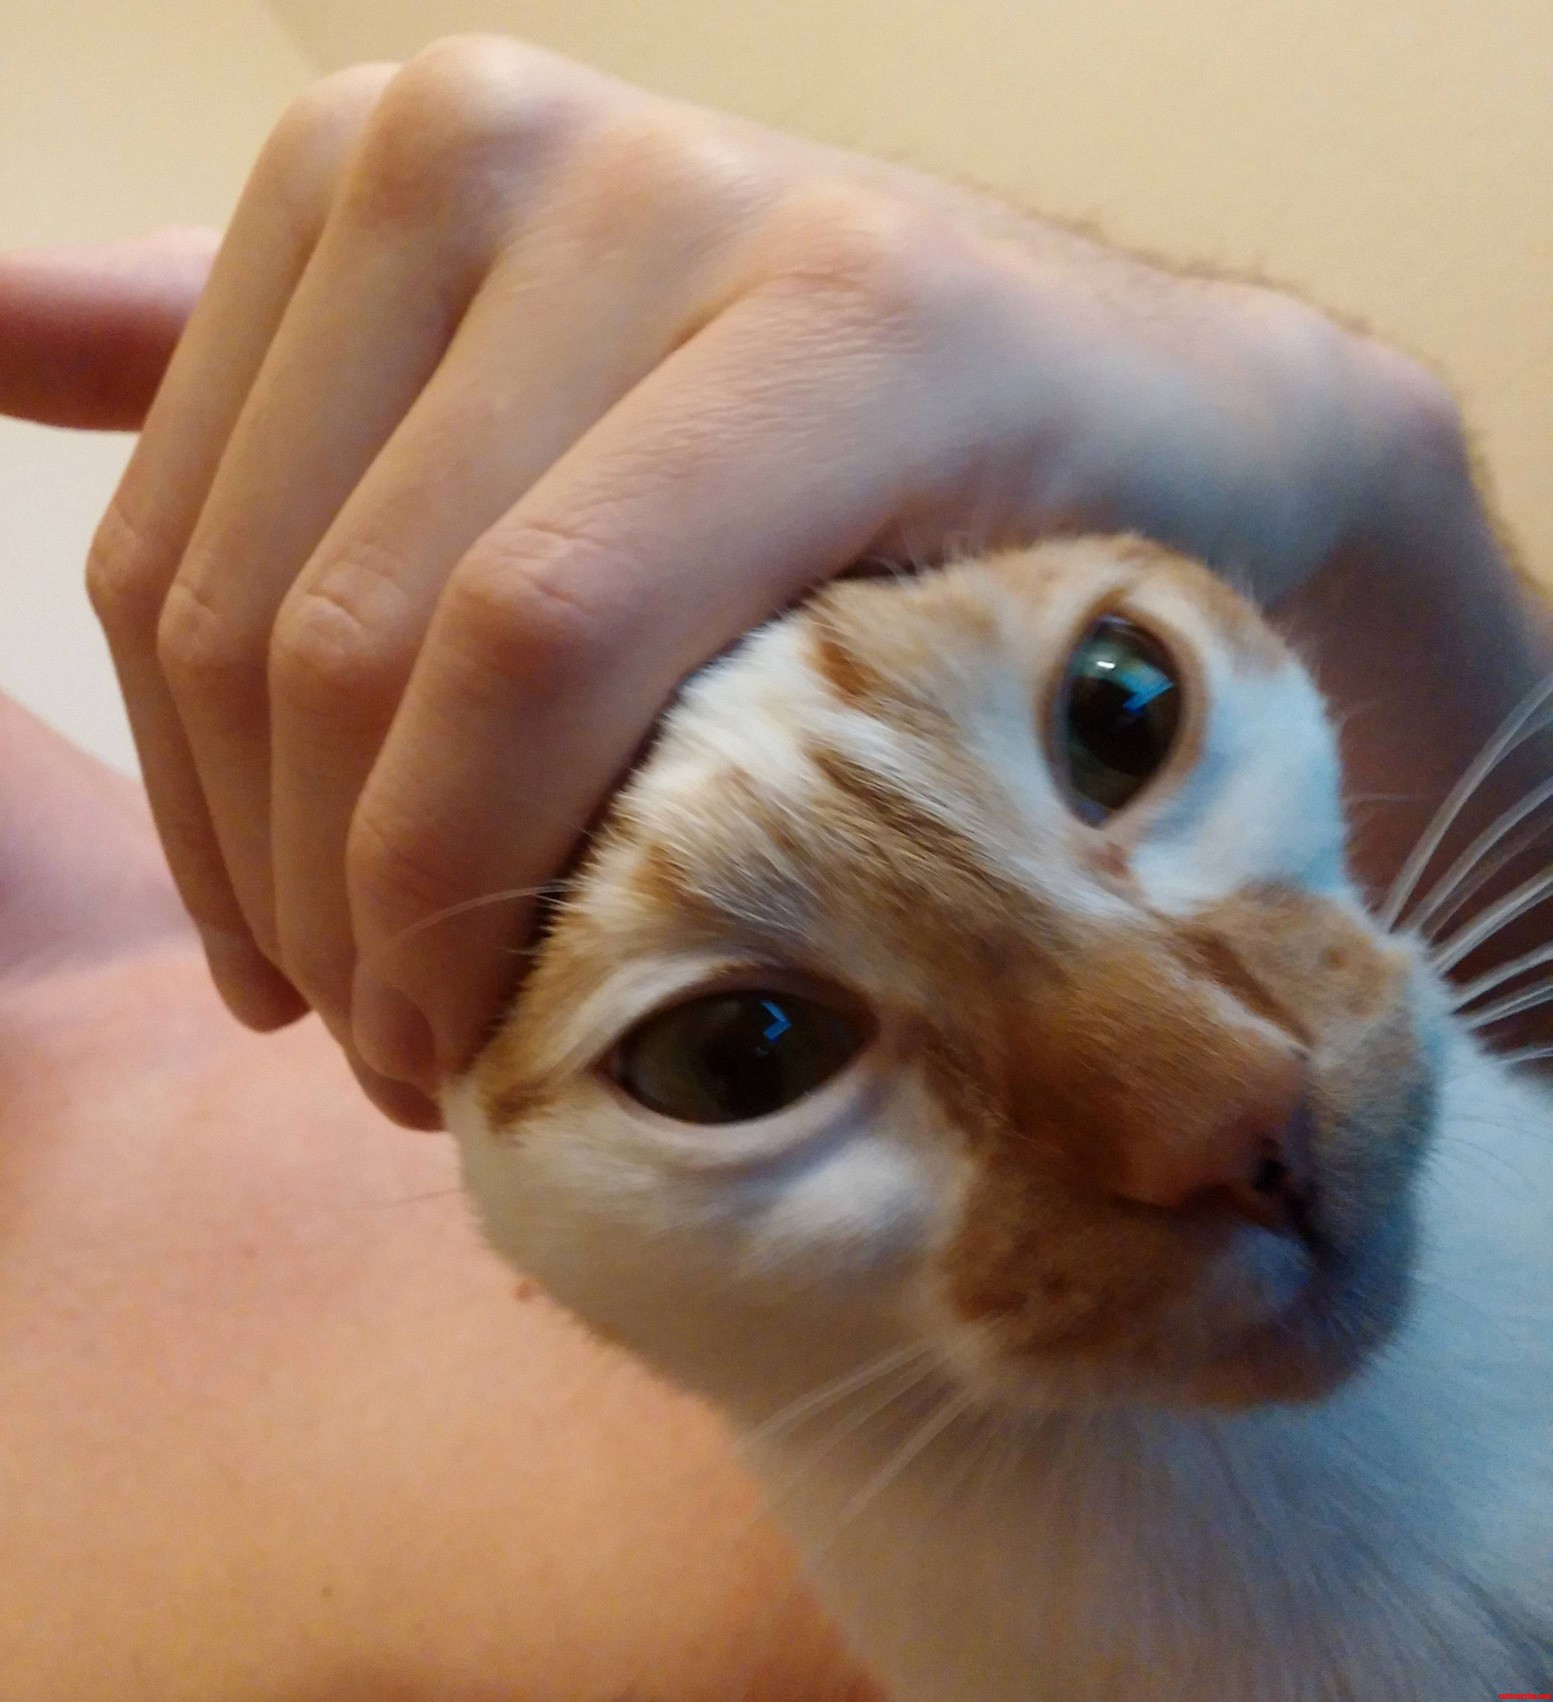 My Cat Likes To Push Her Head In My Hand.